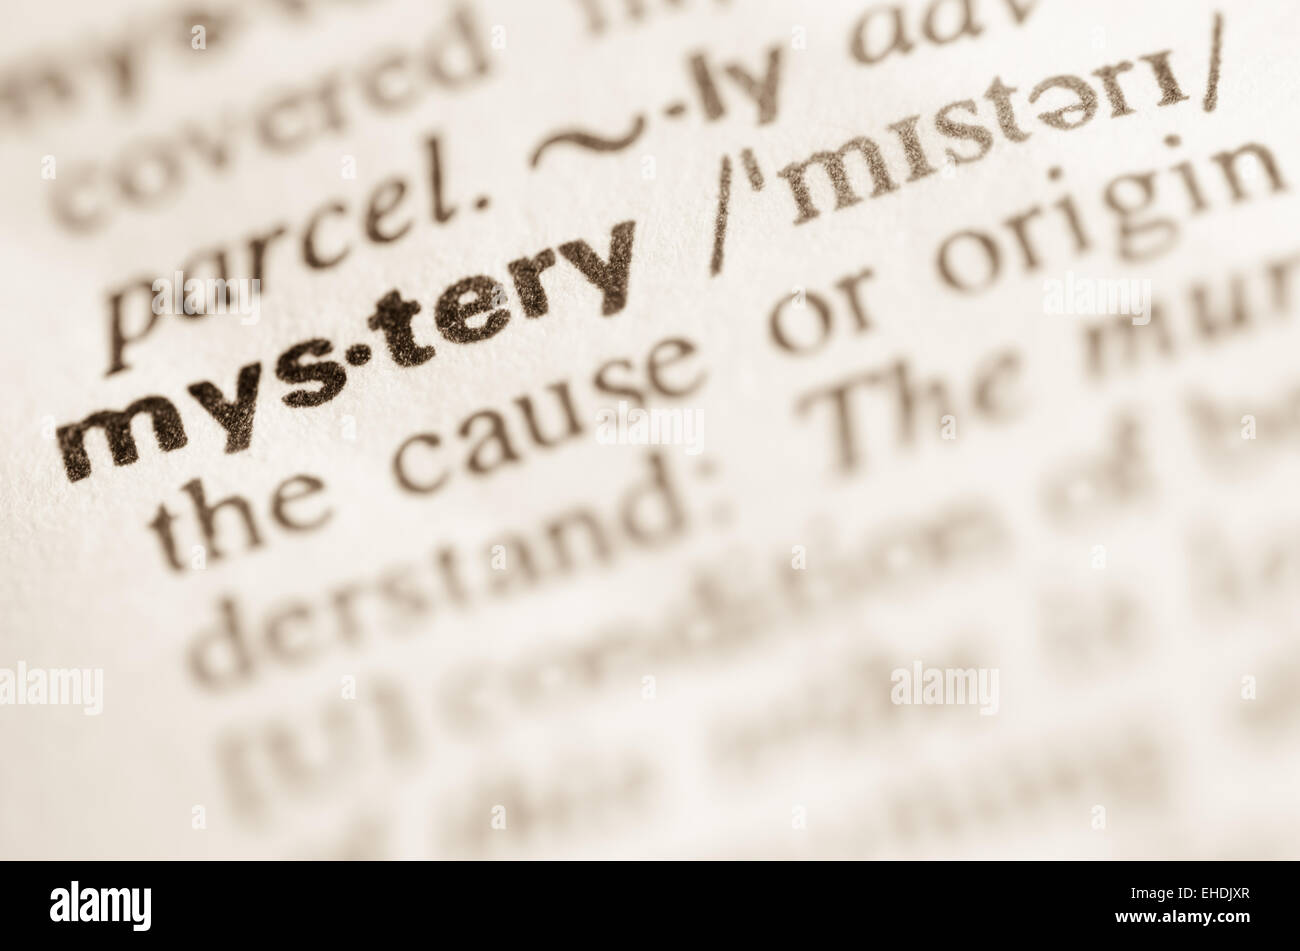 Definition of word mystery in dictionary Stock Photo